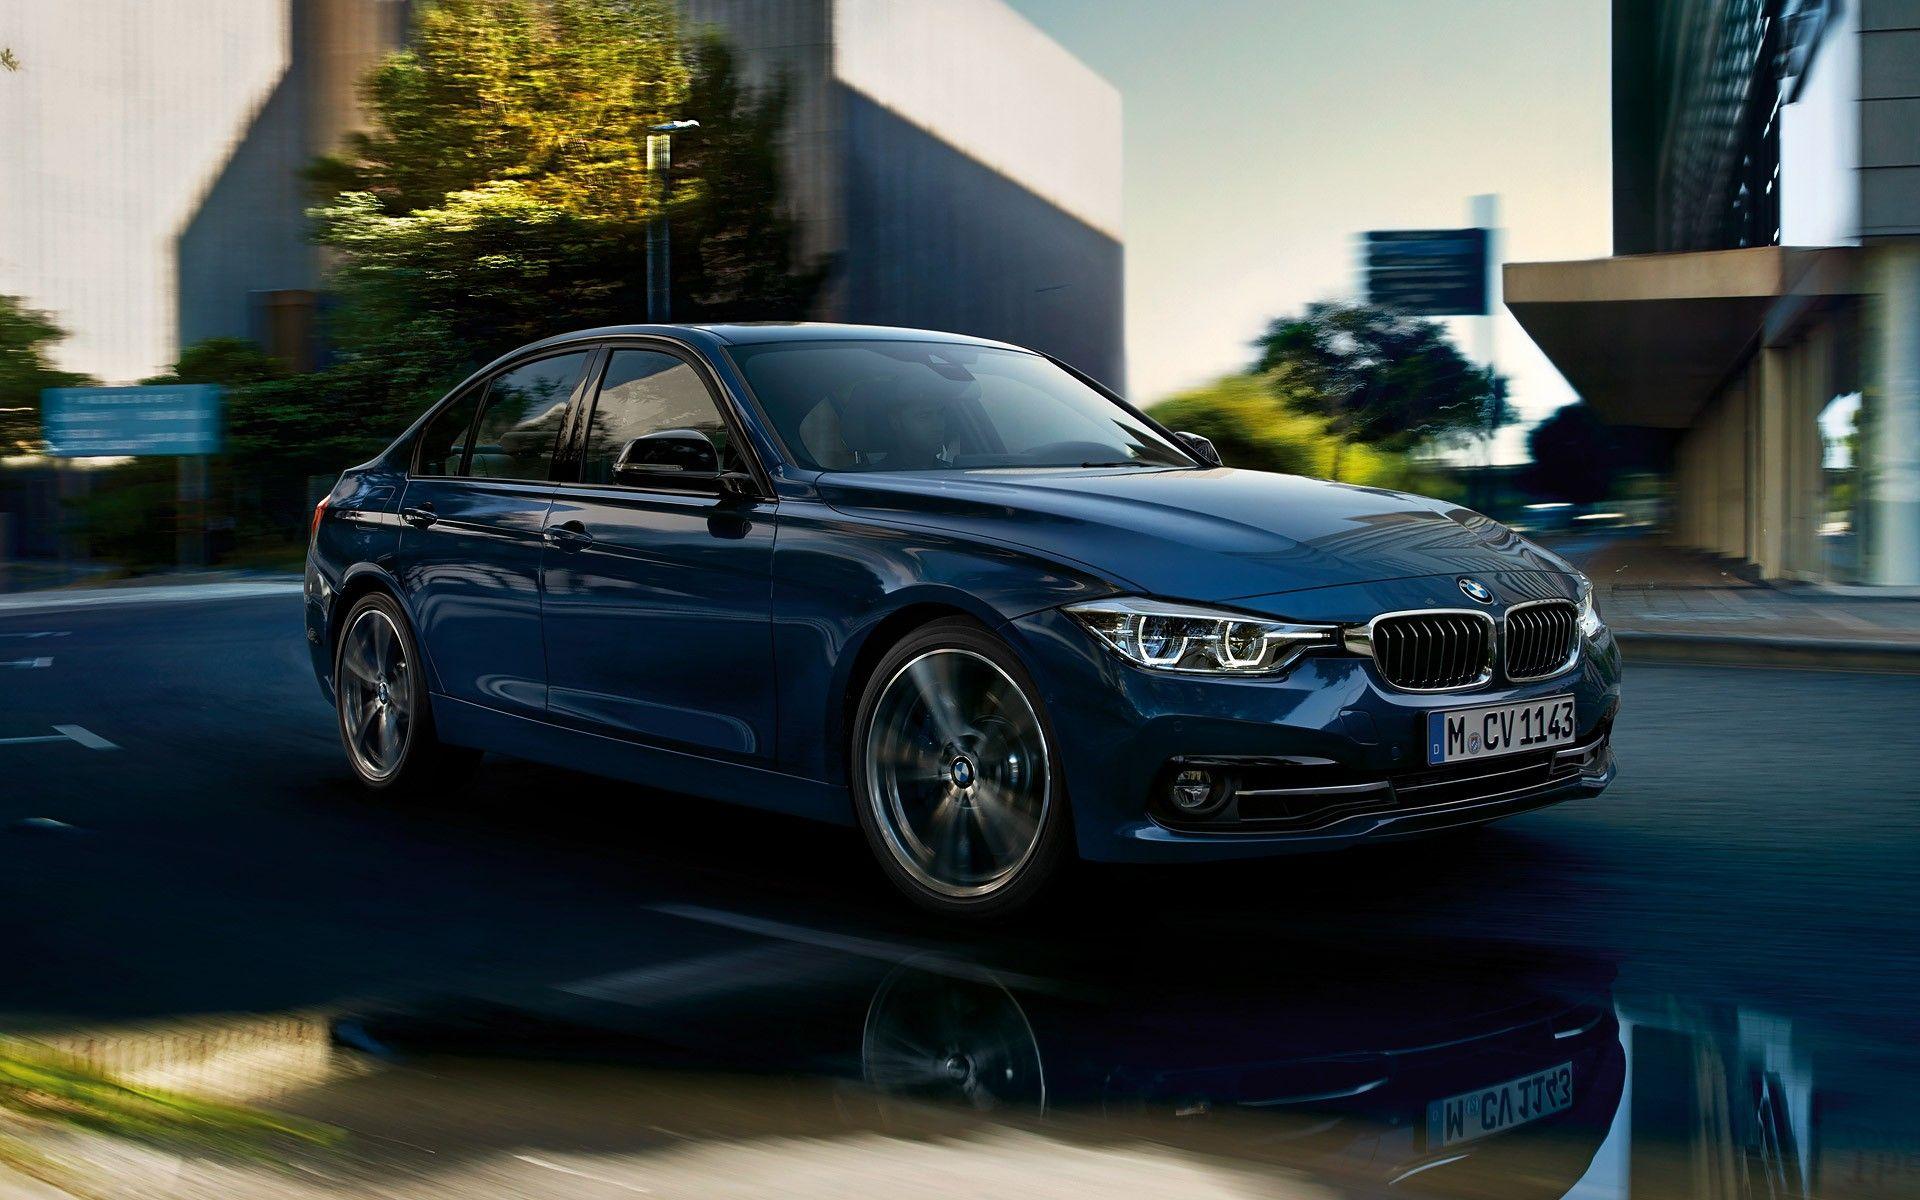 Your Batch of 2016 BMW 3 Series Facelift Wallpaper Is Here